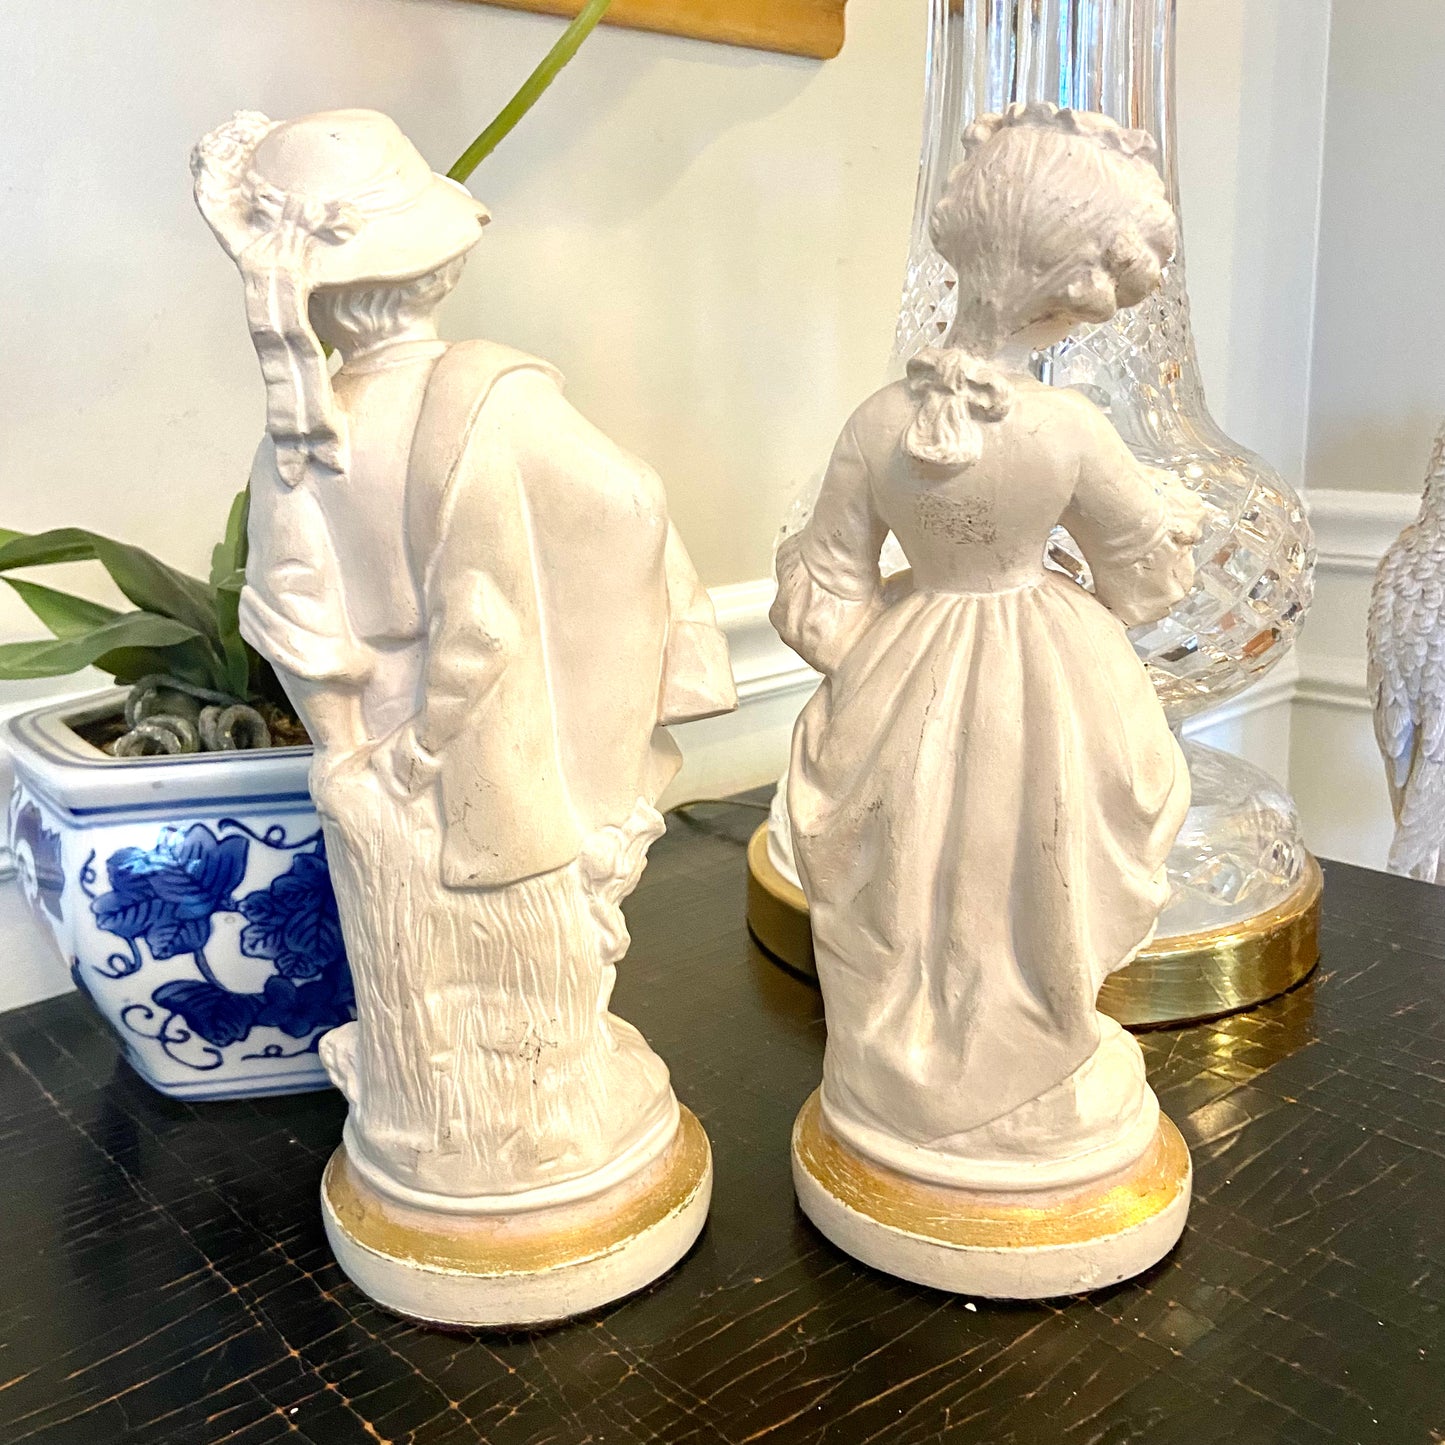 Set of two vintage Girl & Boy figurines statues